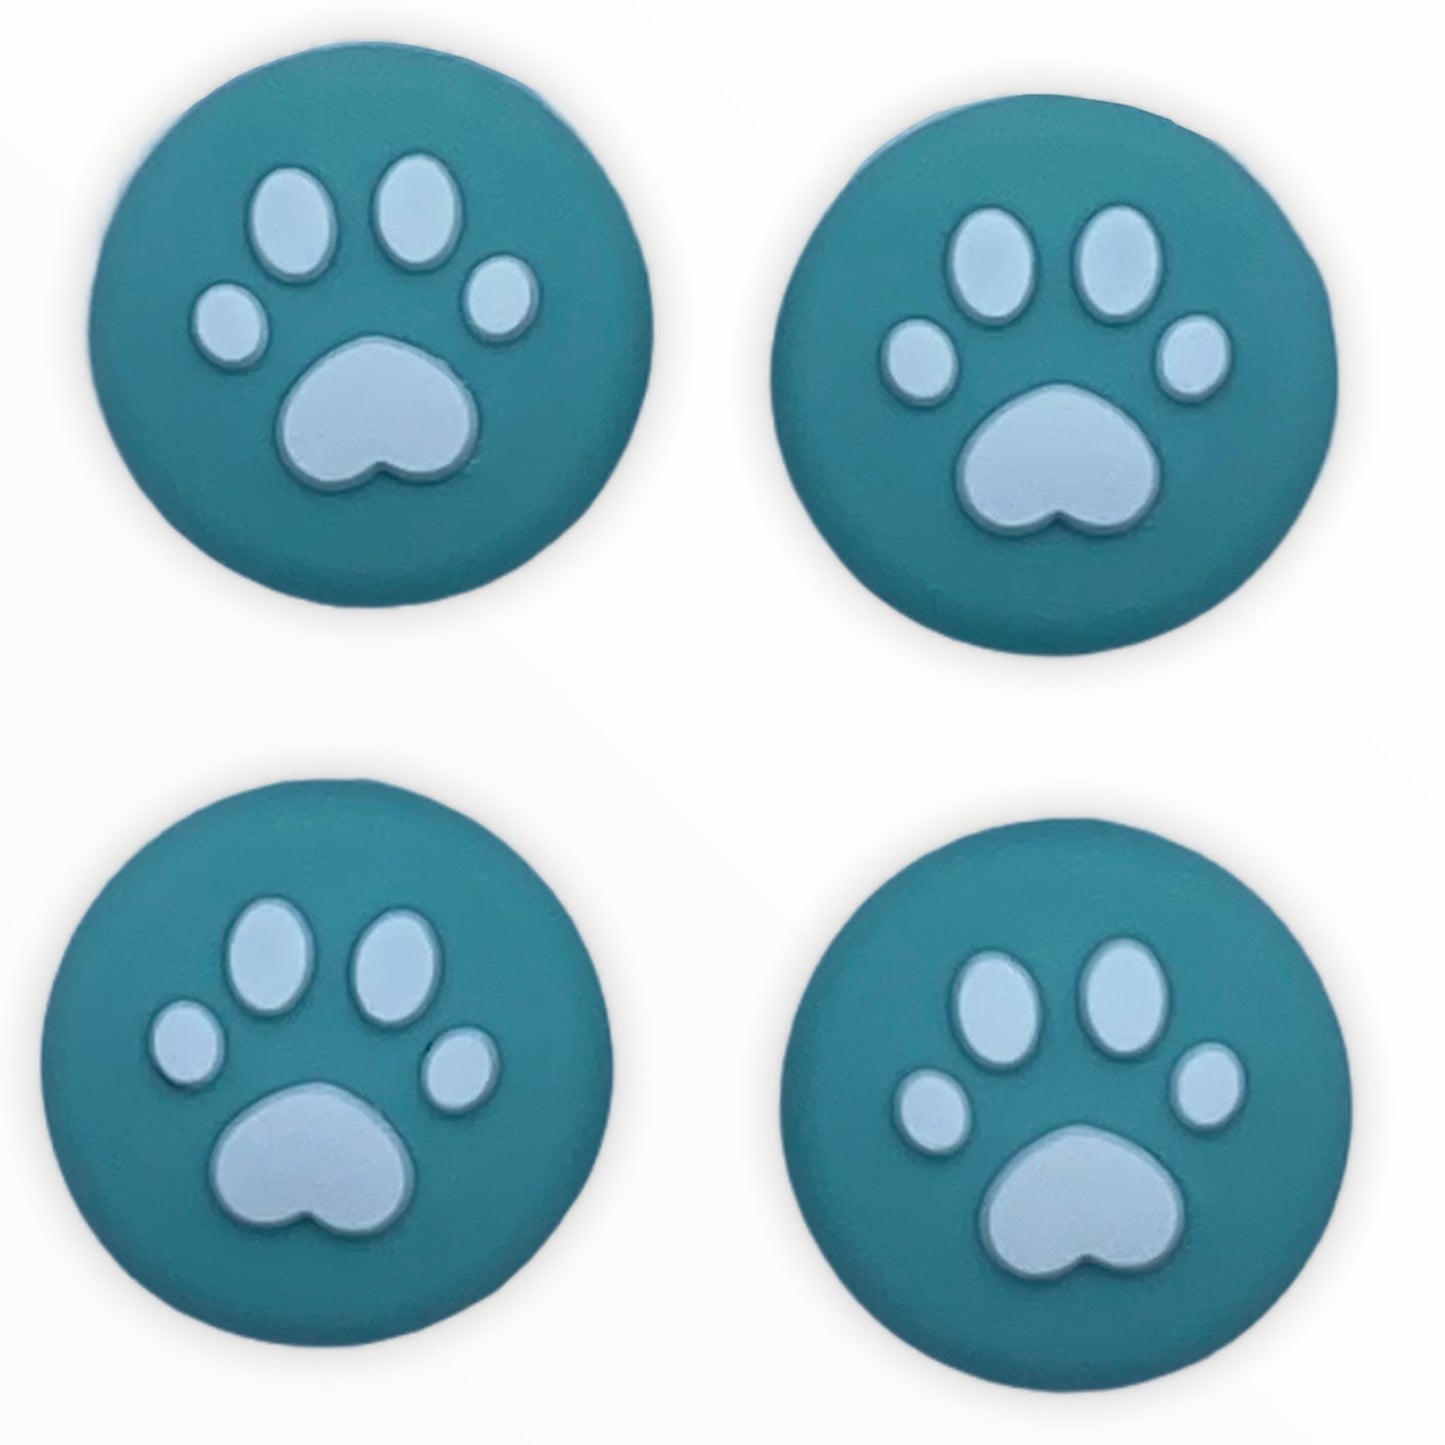 JenDore Teal 4Pcs Paw Silicone Thumb Grip Caps for Nintendo Switch